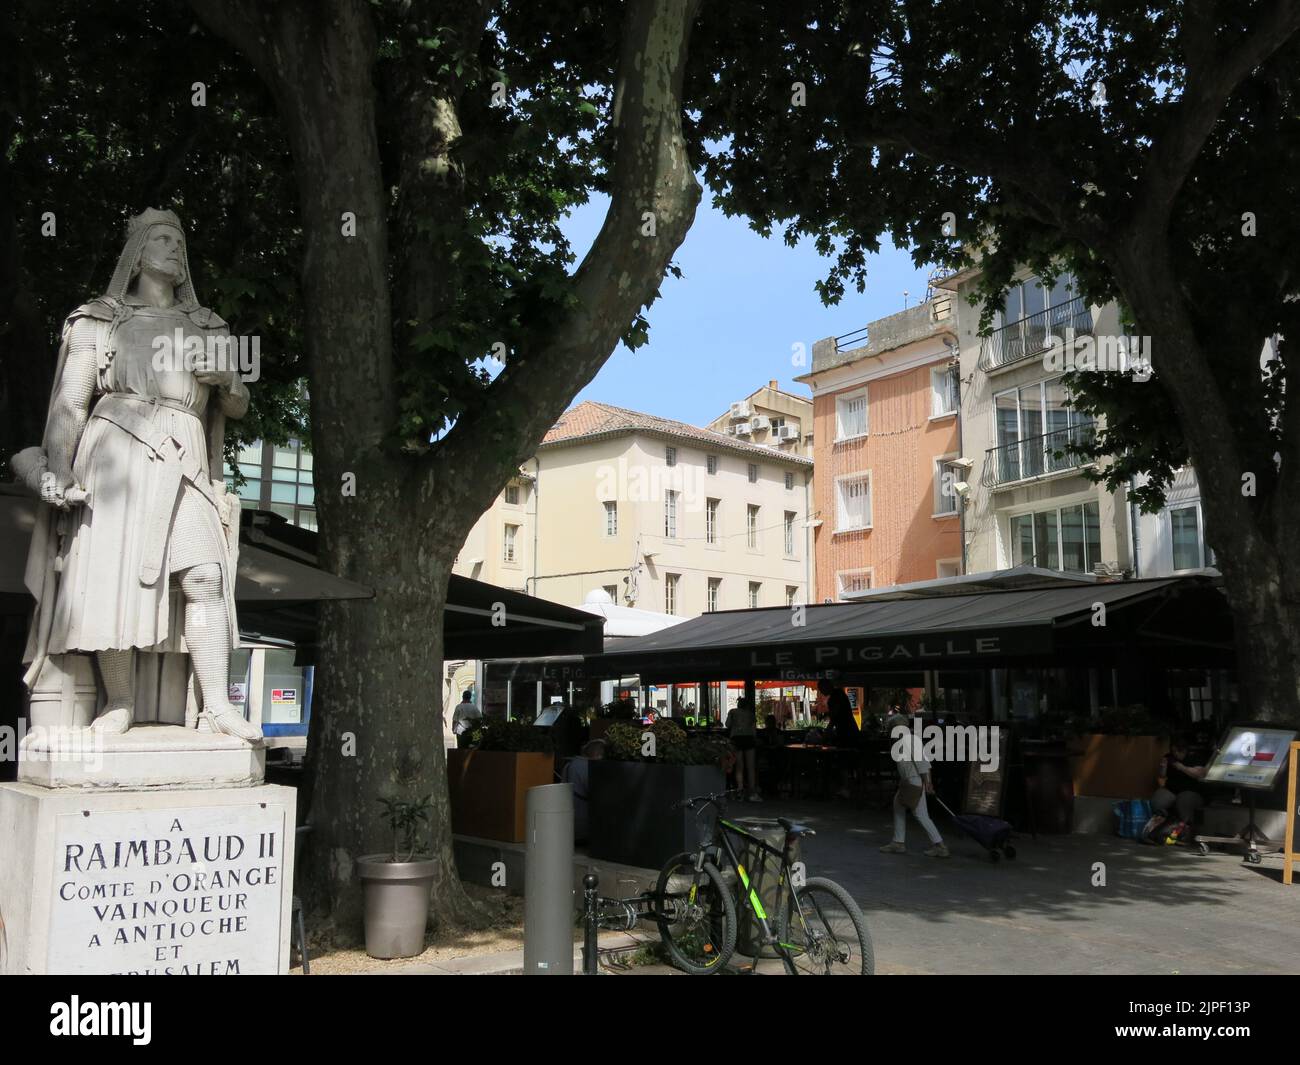 Erected in the town's main square in 1846, the marble statue of Raimbaud II is the 11th century Count of Orange, associated with the Crusades. Stock Photo